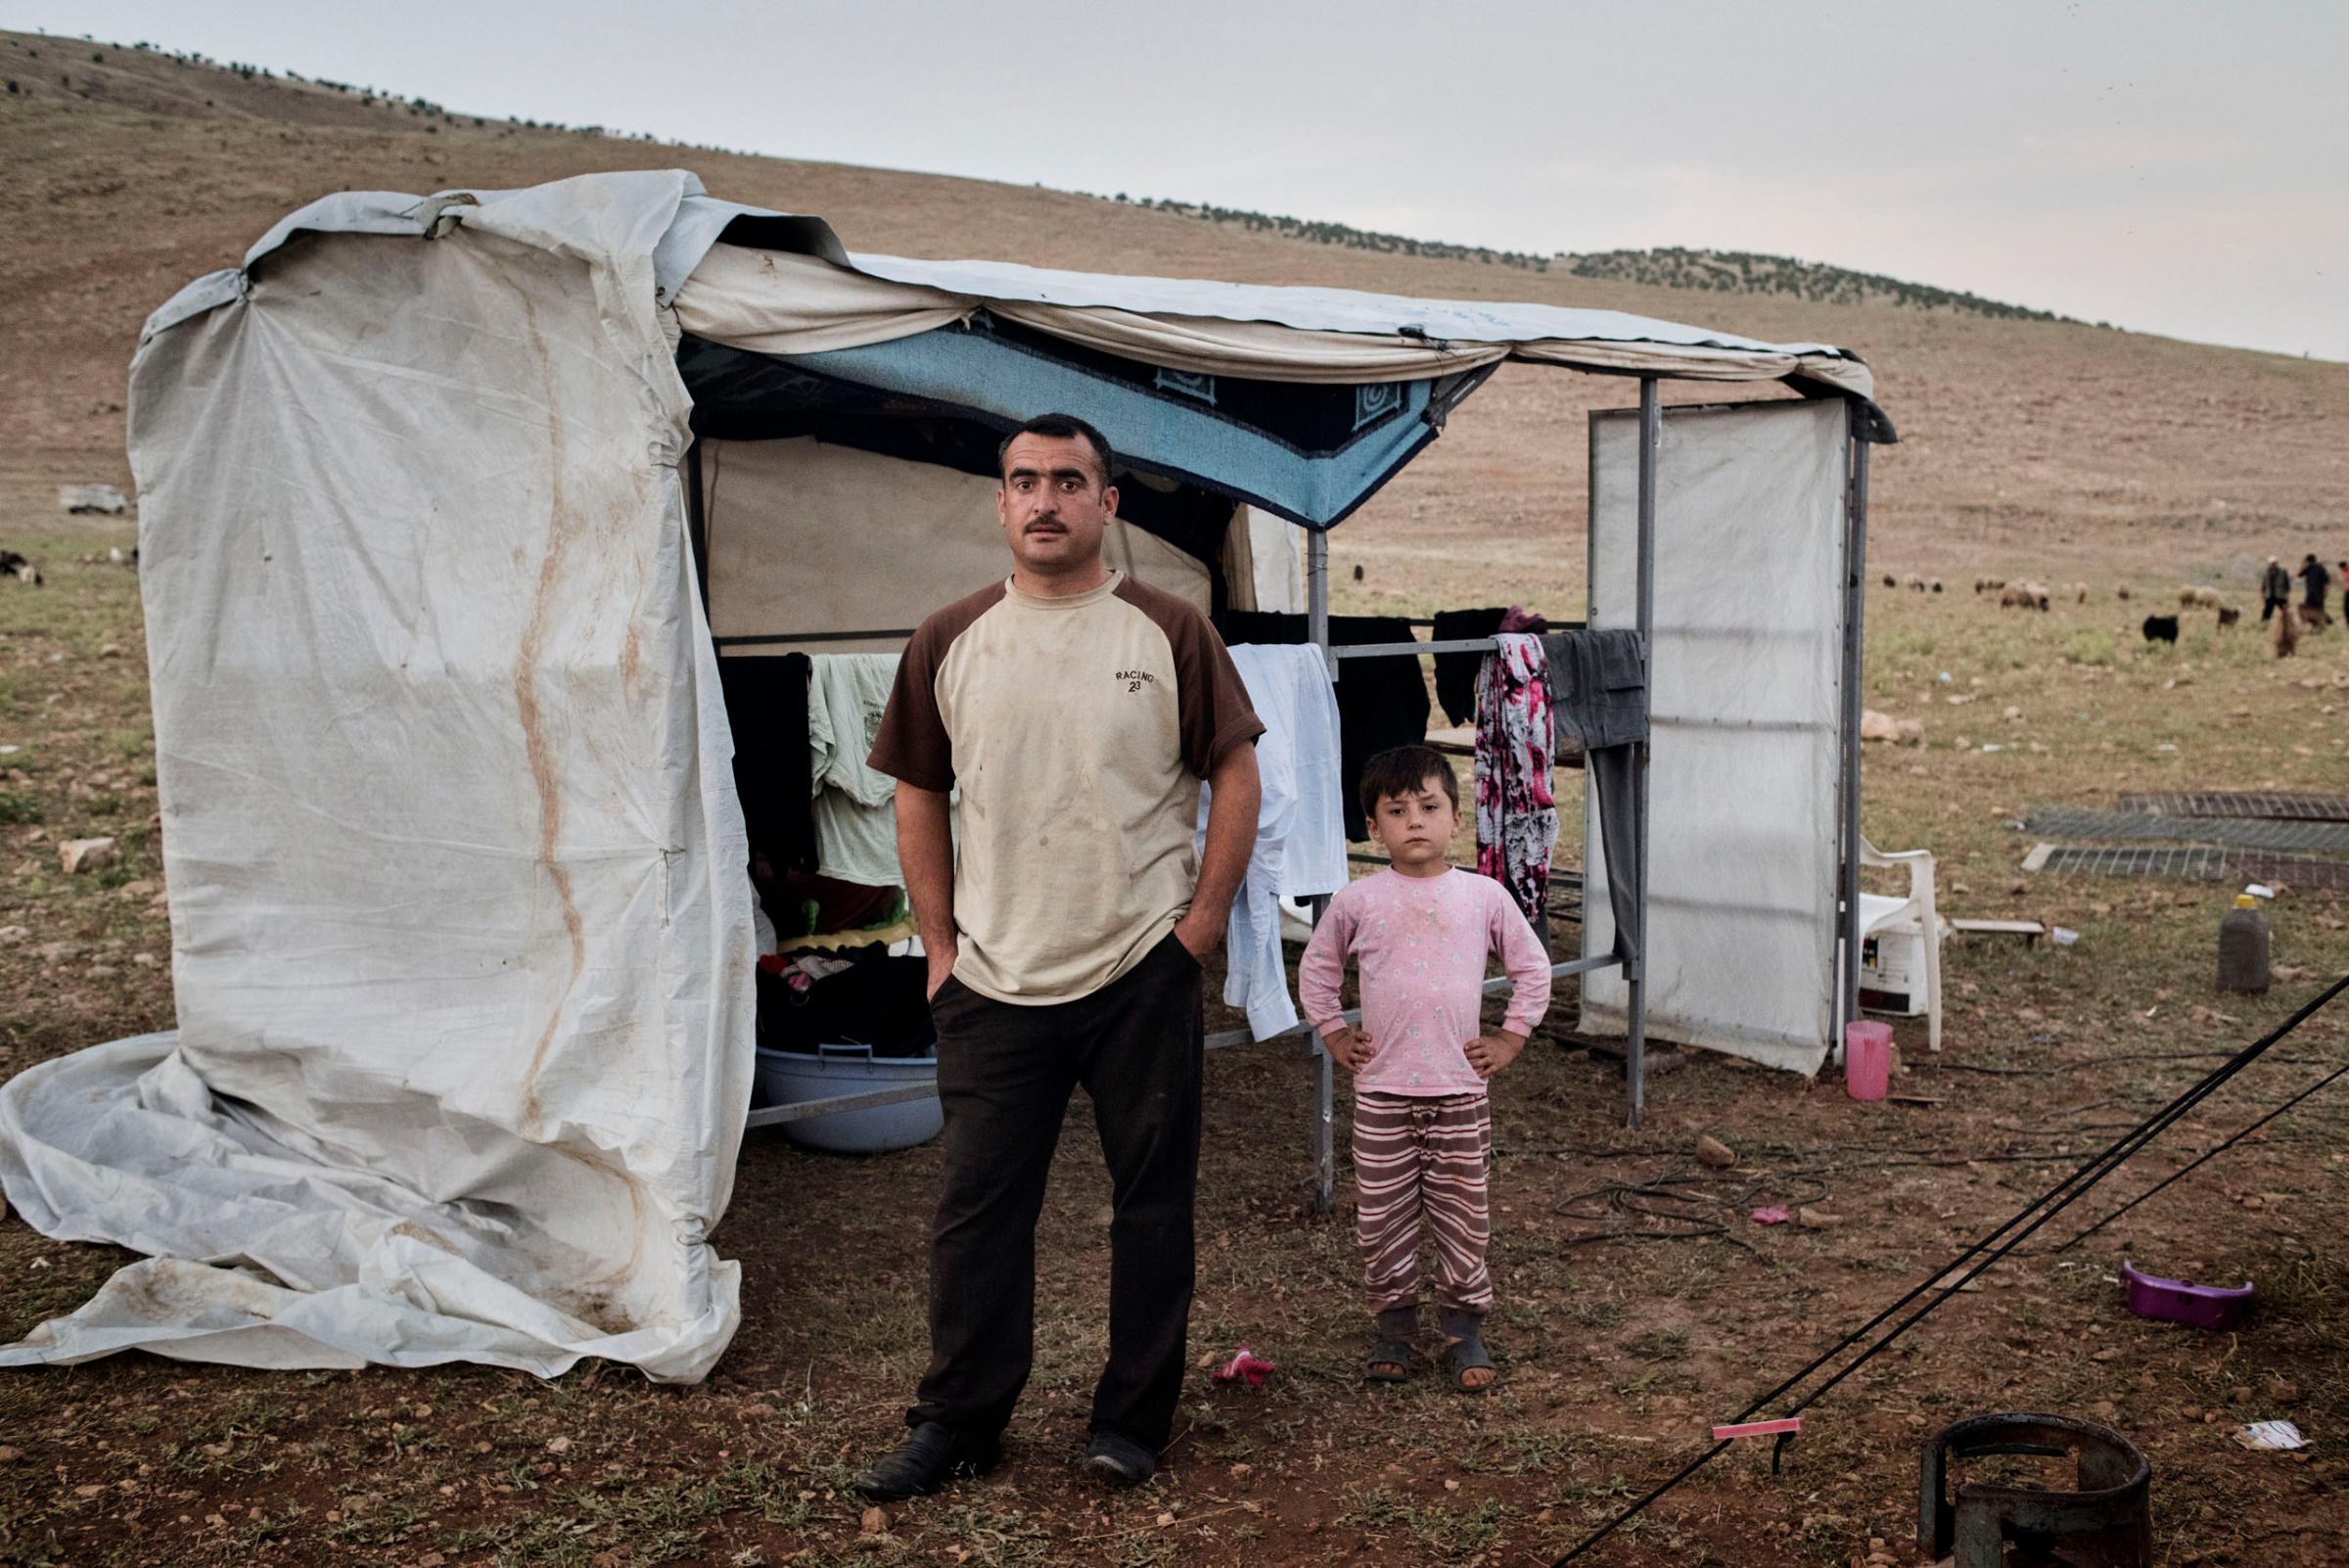 Qubad Miqdad Murad, a police officer in his thirties, stands in a camp for internally displaced people near the Iraqi town of Sinjar, May 13, 2016. Murad returned to Sinjar after Kurdish forces recaptured it from ISIS in November 2015, but he since decided to move to the IDP camp in the mountains above Sinjar, fearing for the safety of his family as ISIS continues to shell the area